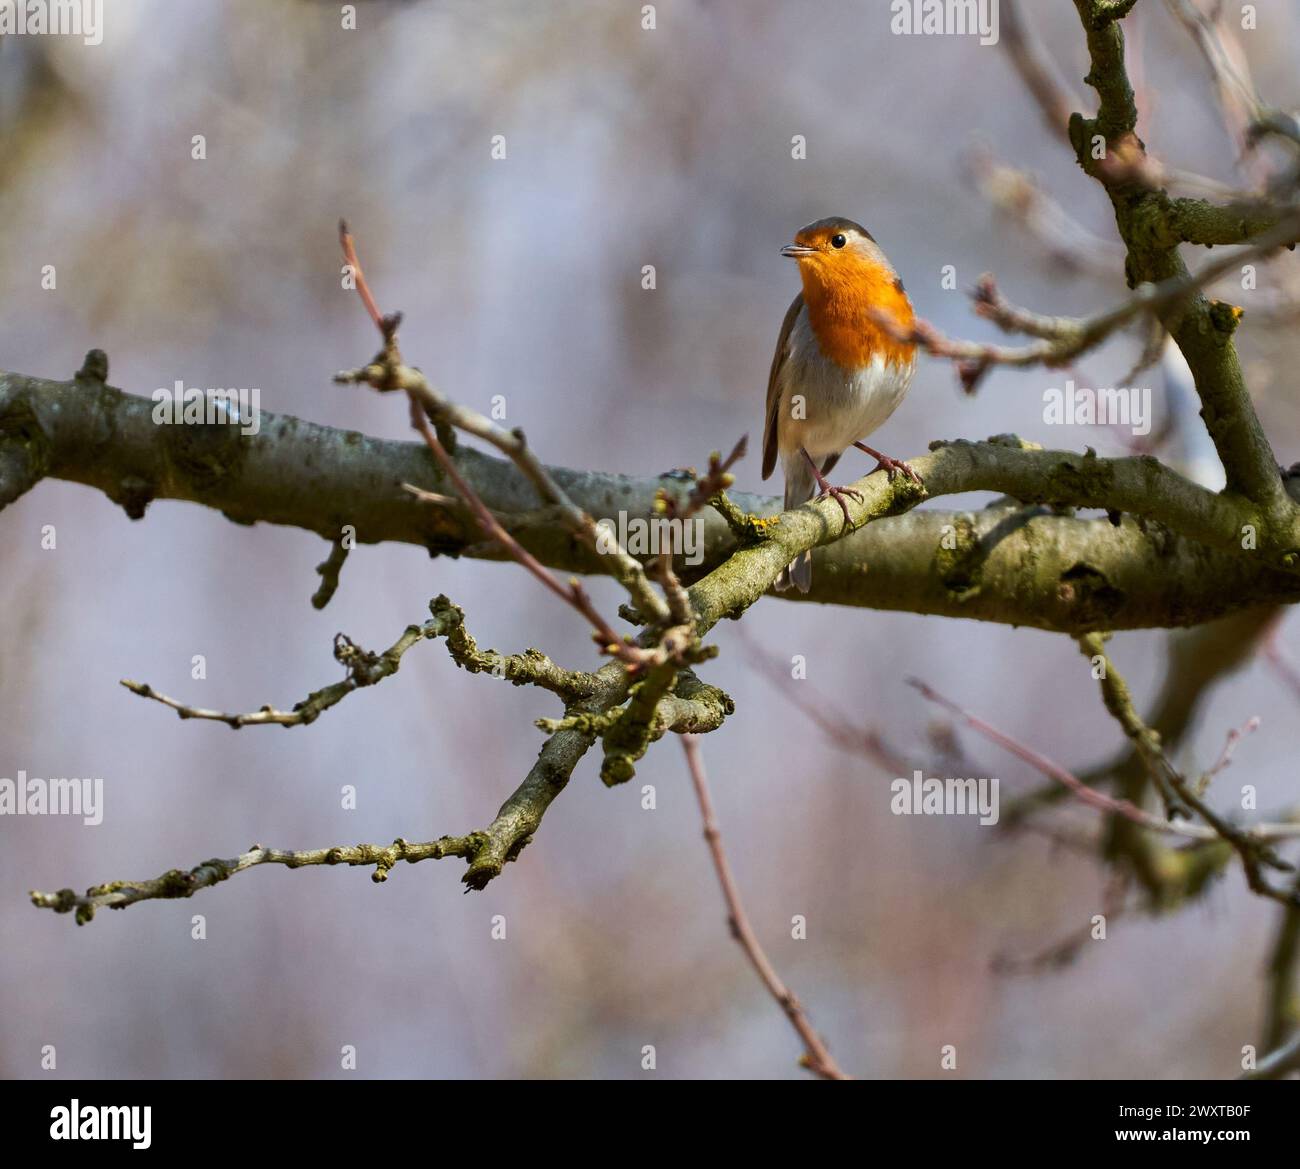 European robin (Erithacus rubecula) Perched on a branch in a tree Stock Photo